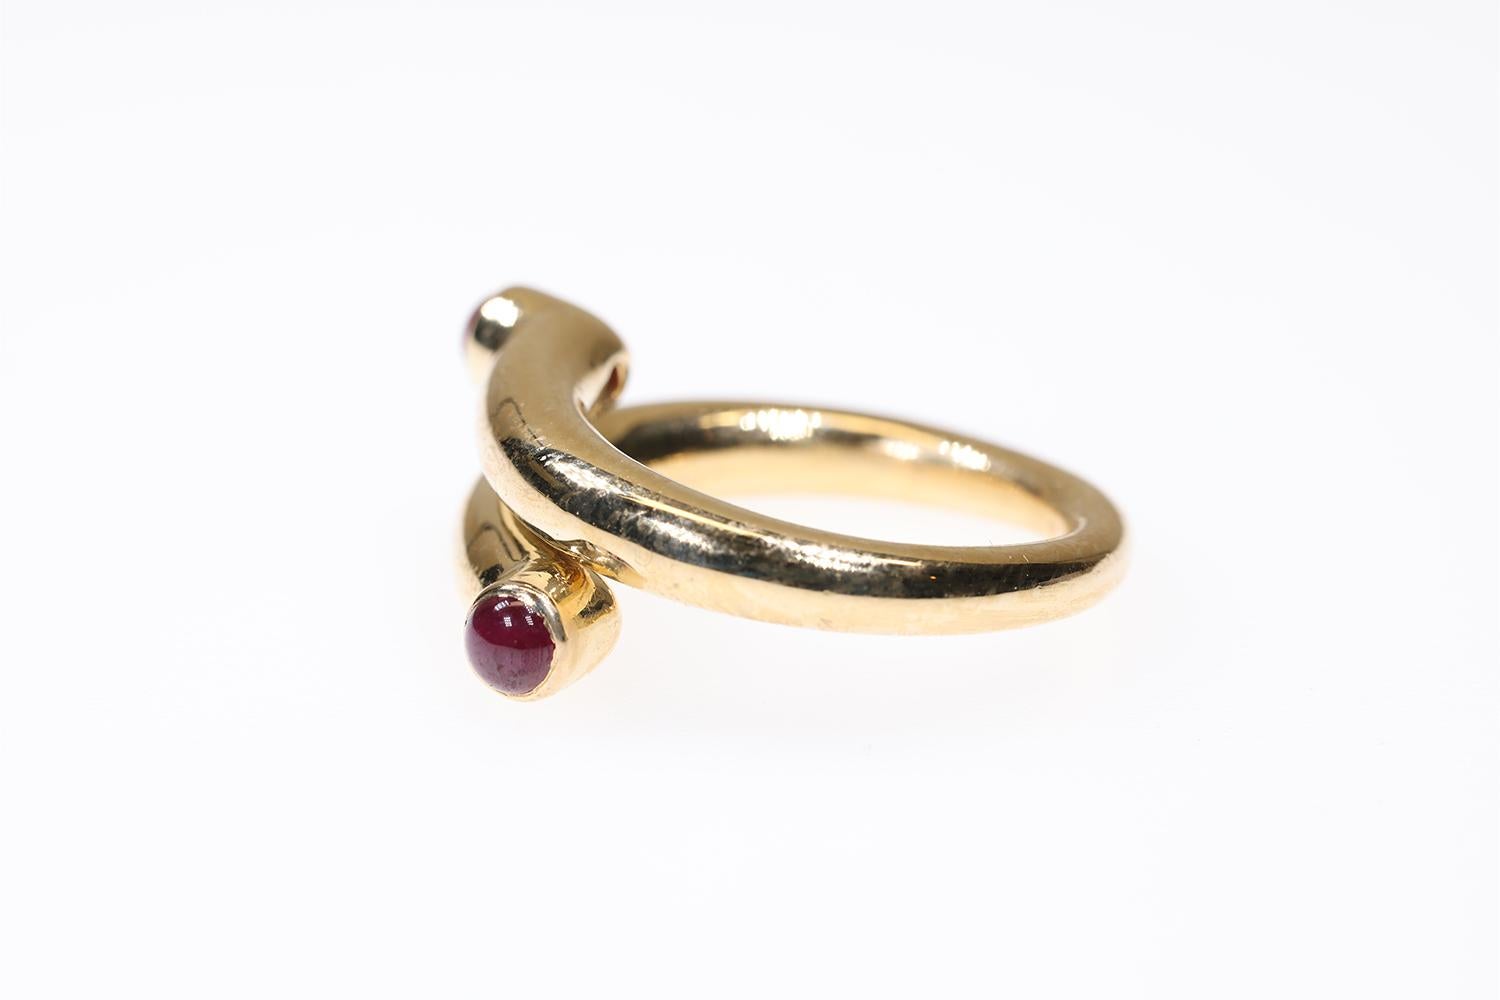 Women's or Men's Designer Ring by Tiffany & Co, Jean Schlumberger, 18K Gold, Ruby Cabochons